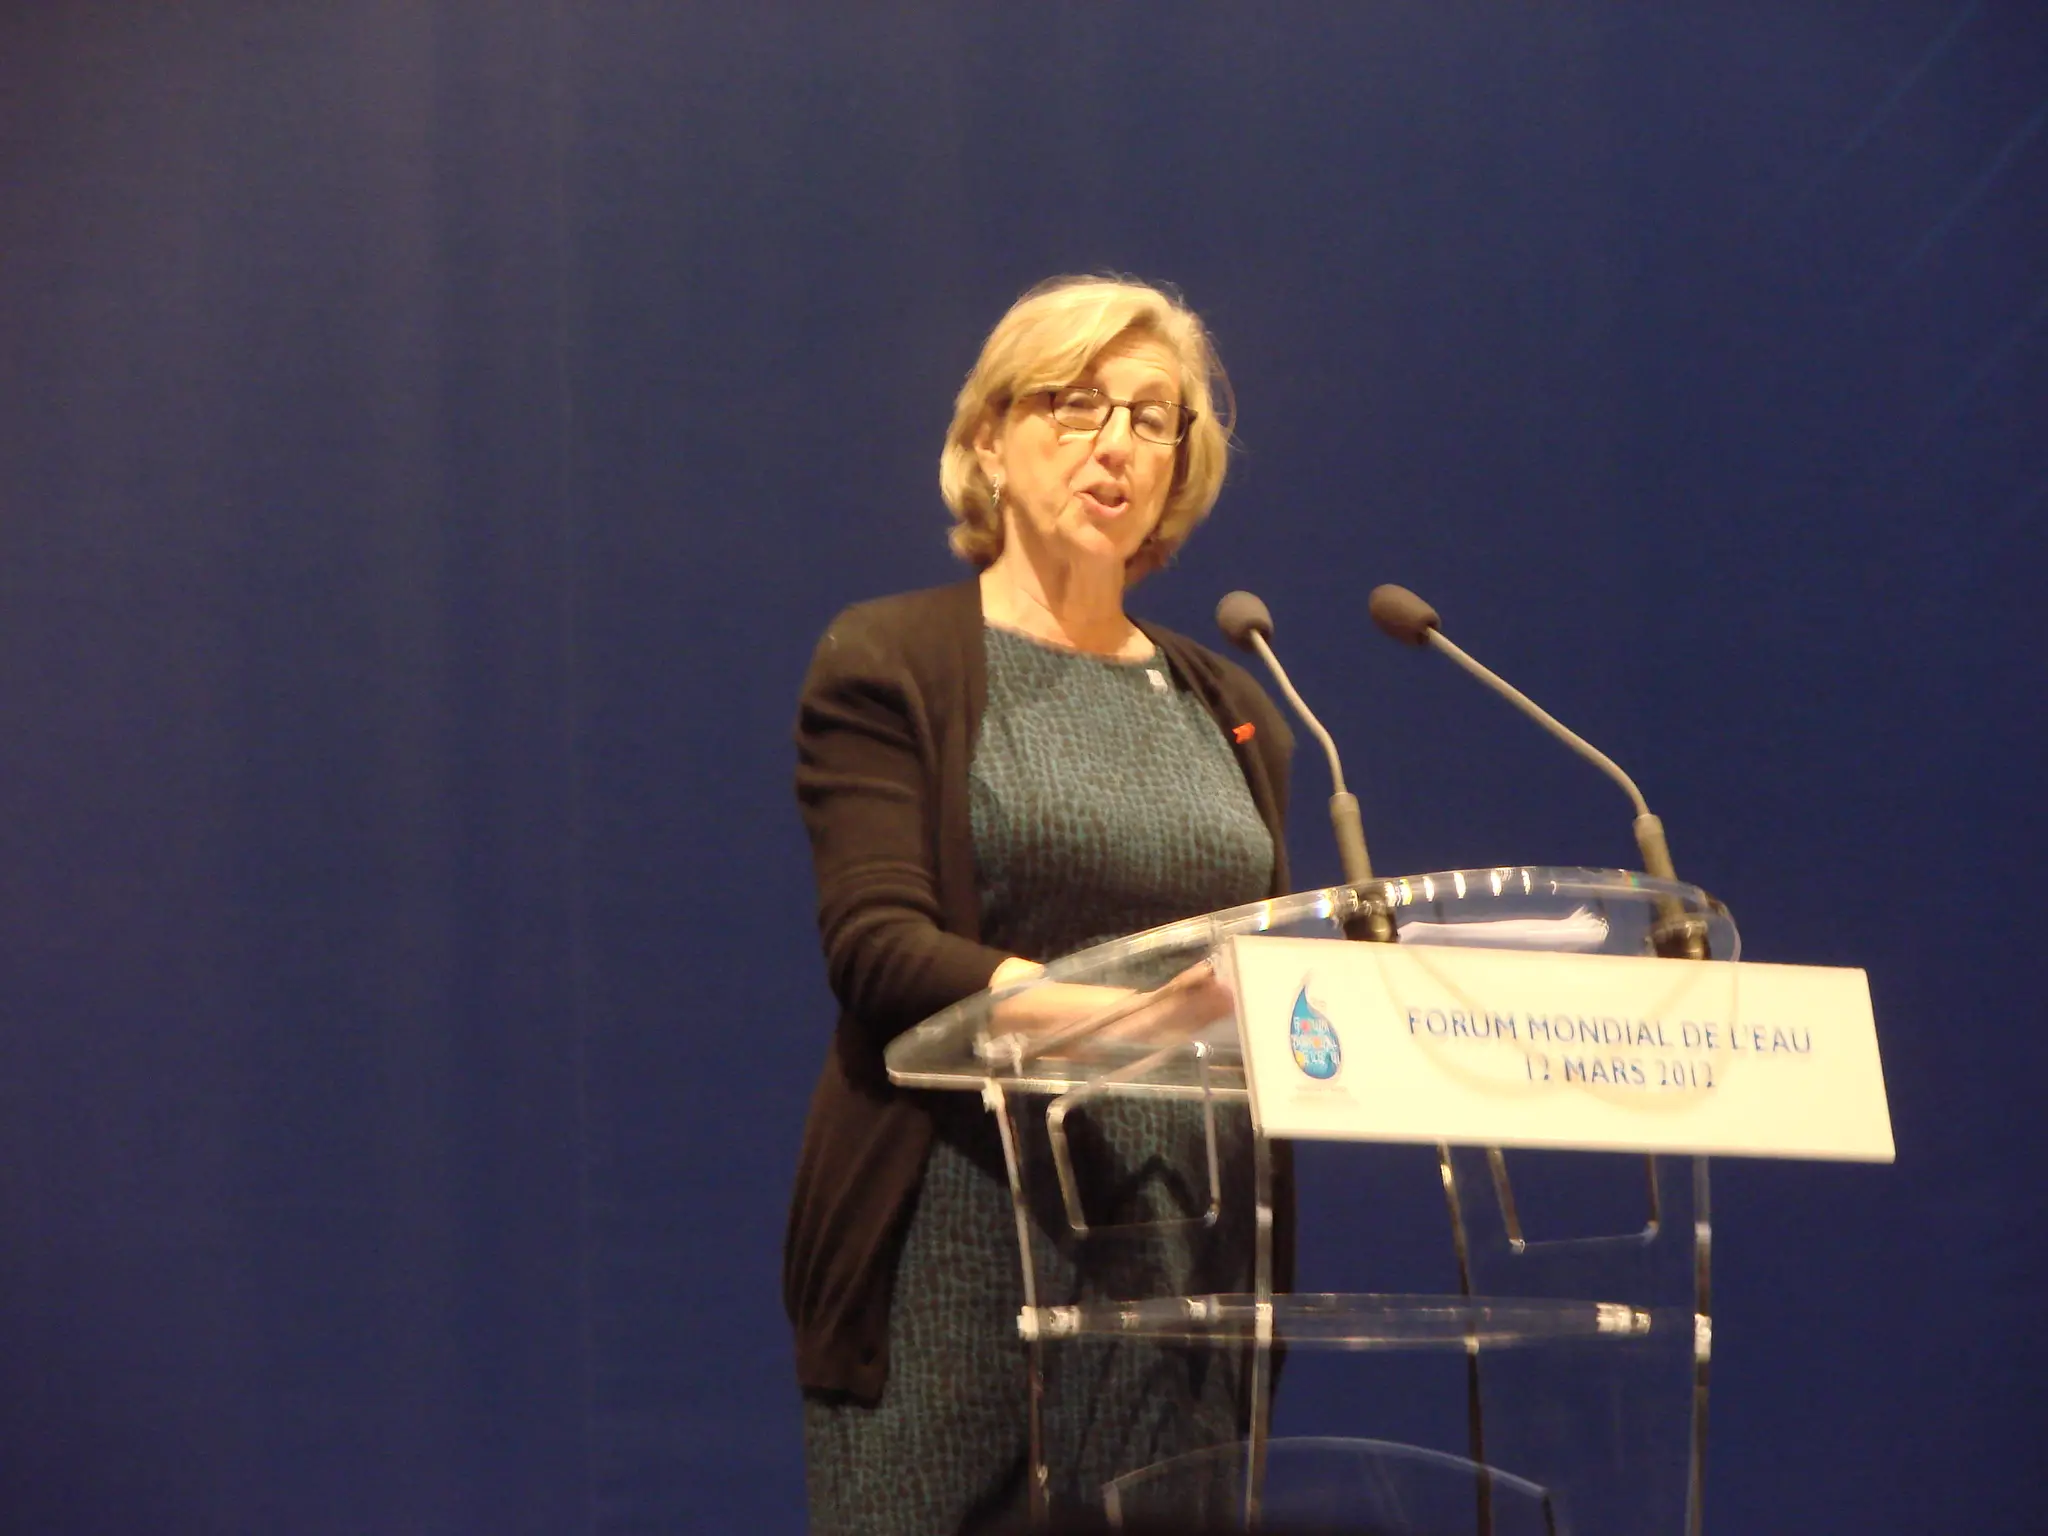 IUCN Director General, Julia Marton-Lefèvre speaking on the opening day of the World Water Forum in Marseille, France.